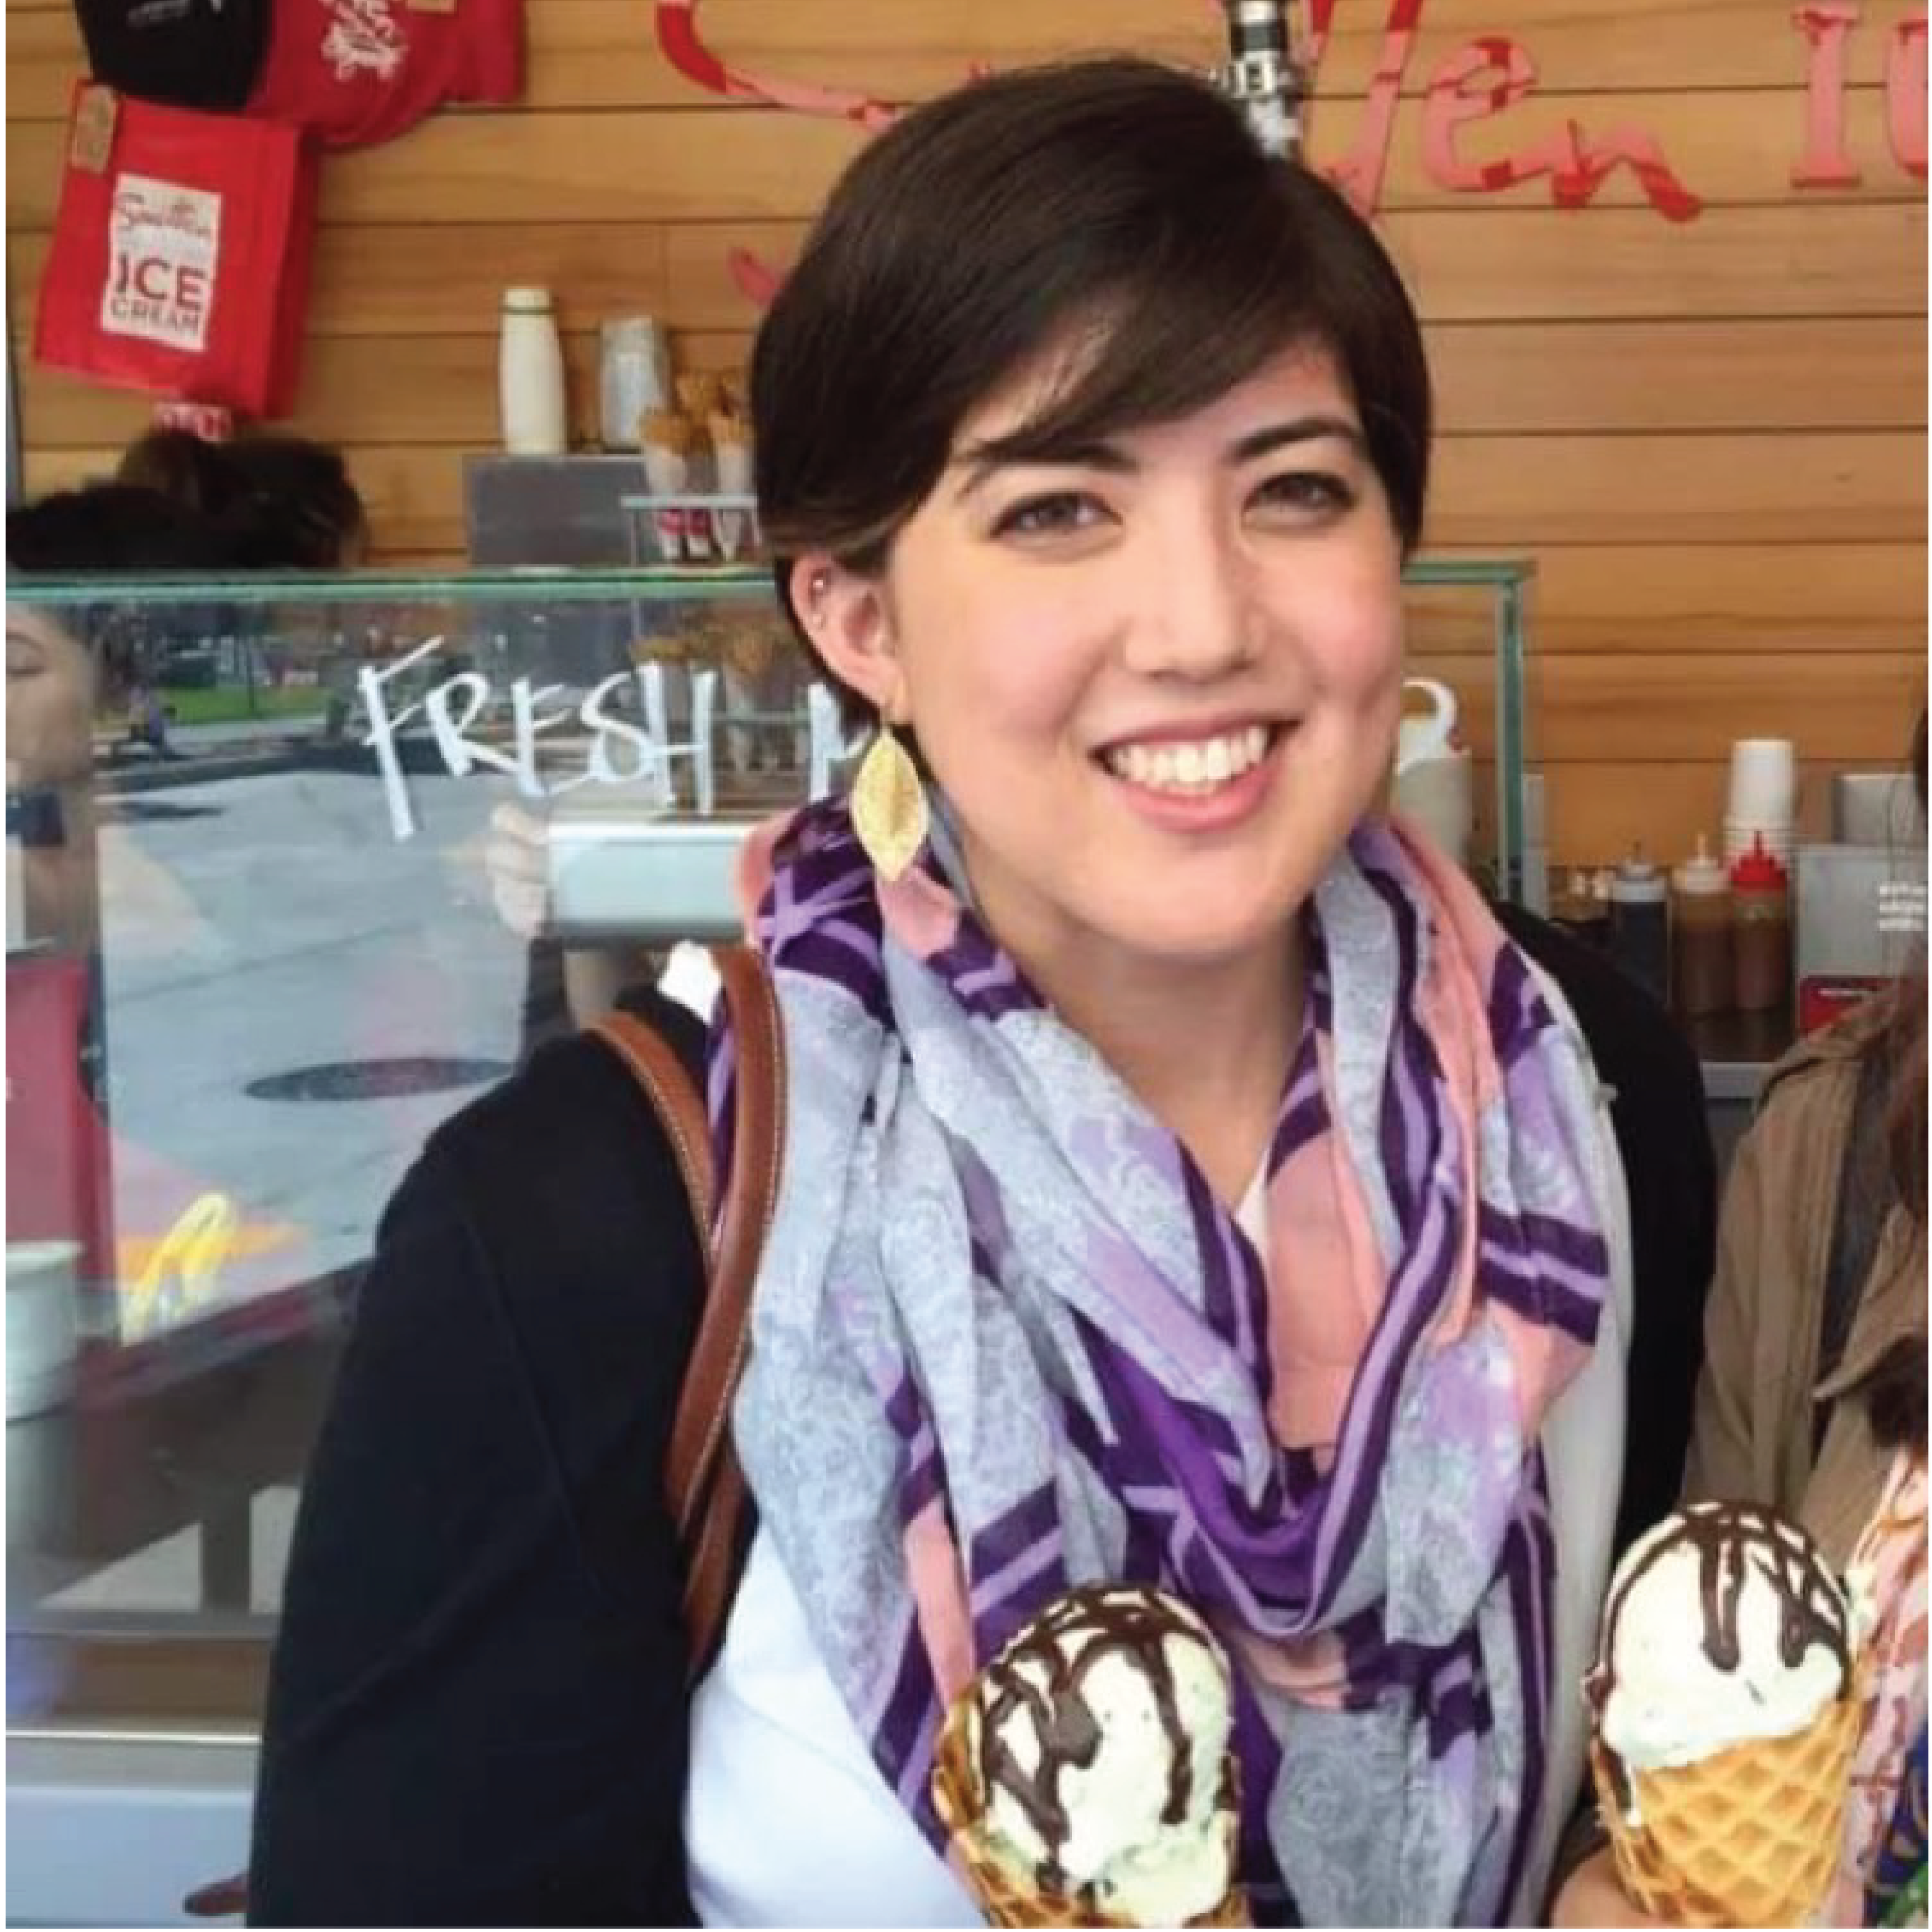 A feminine multiracial person in her mid-twenties is smiling and holding an ice cream cone. She has short brown hair and is wearing gold leaf-shaped earrings a scarf with a purple and pink striped and floral pattern.